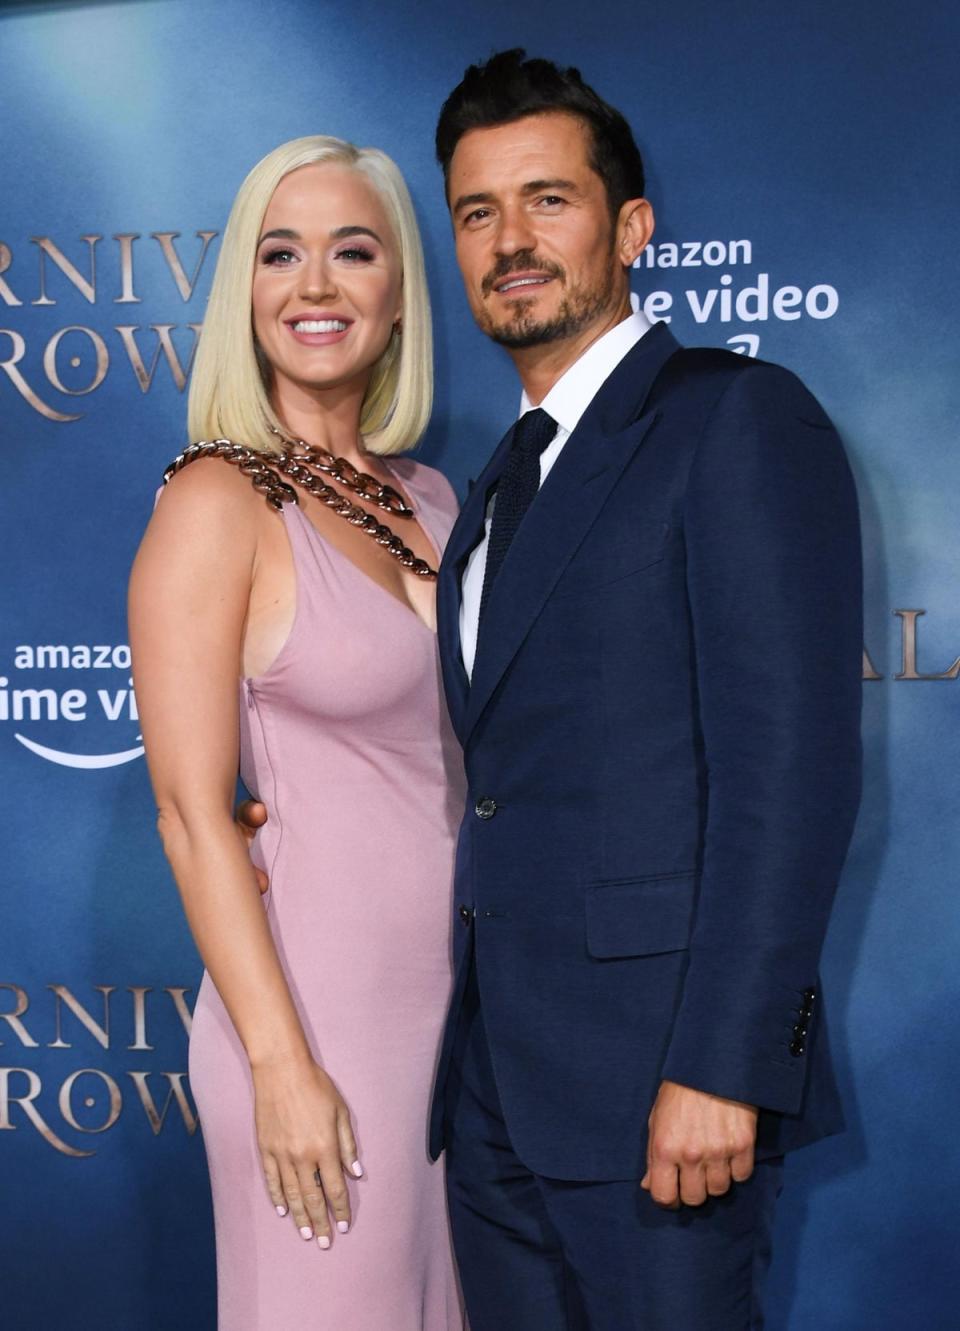 Katy Perry and Orlando Bloom attend the premiere of Carnival Row on August 21, 2019 (Getty Images)